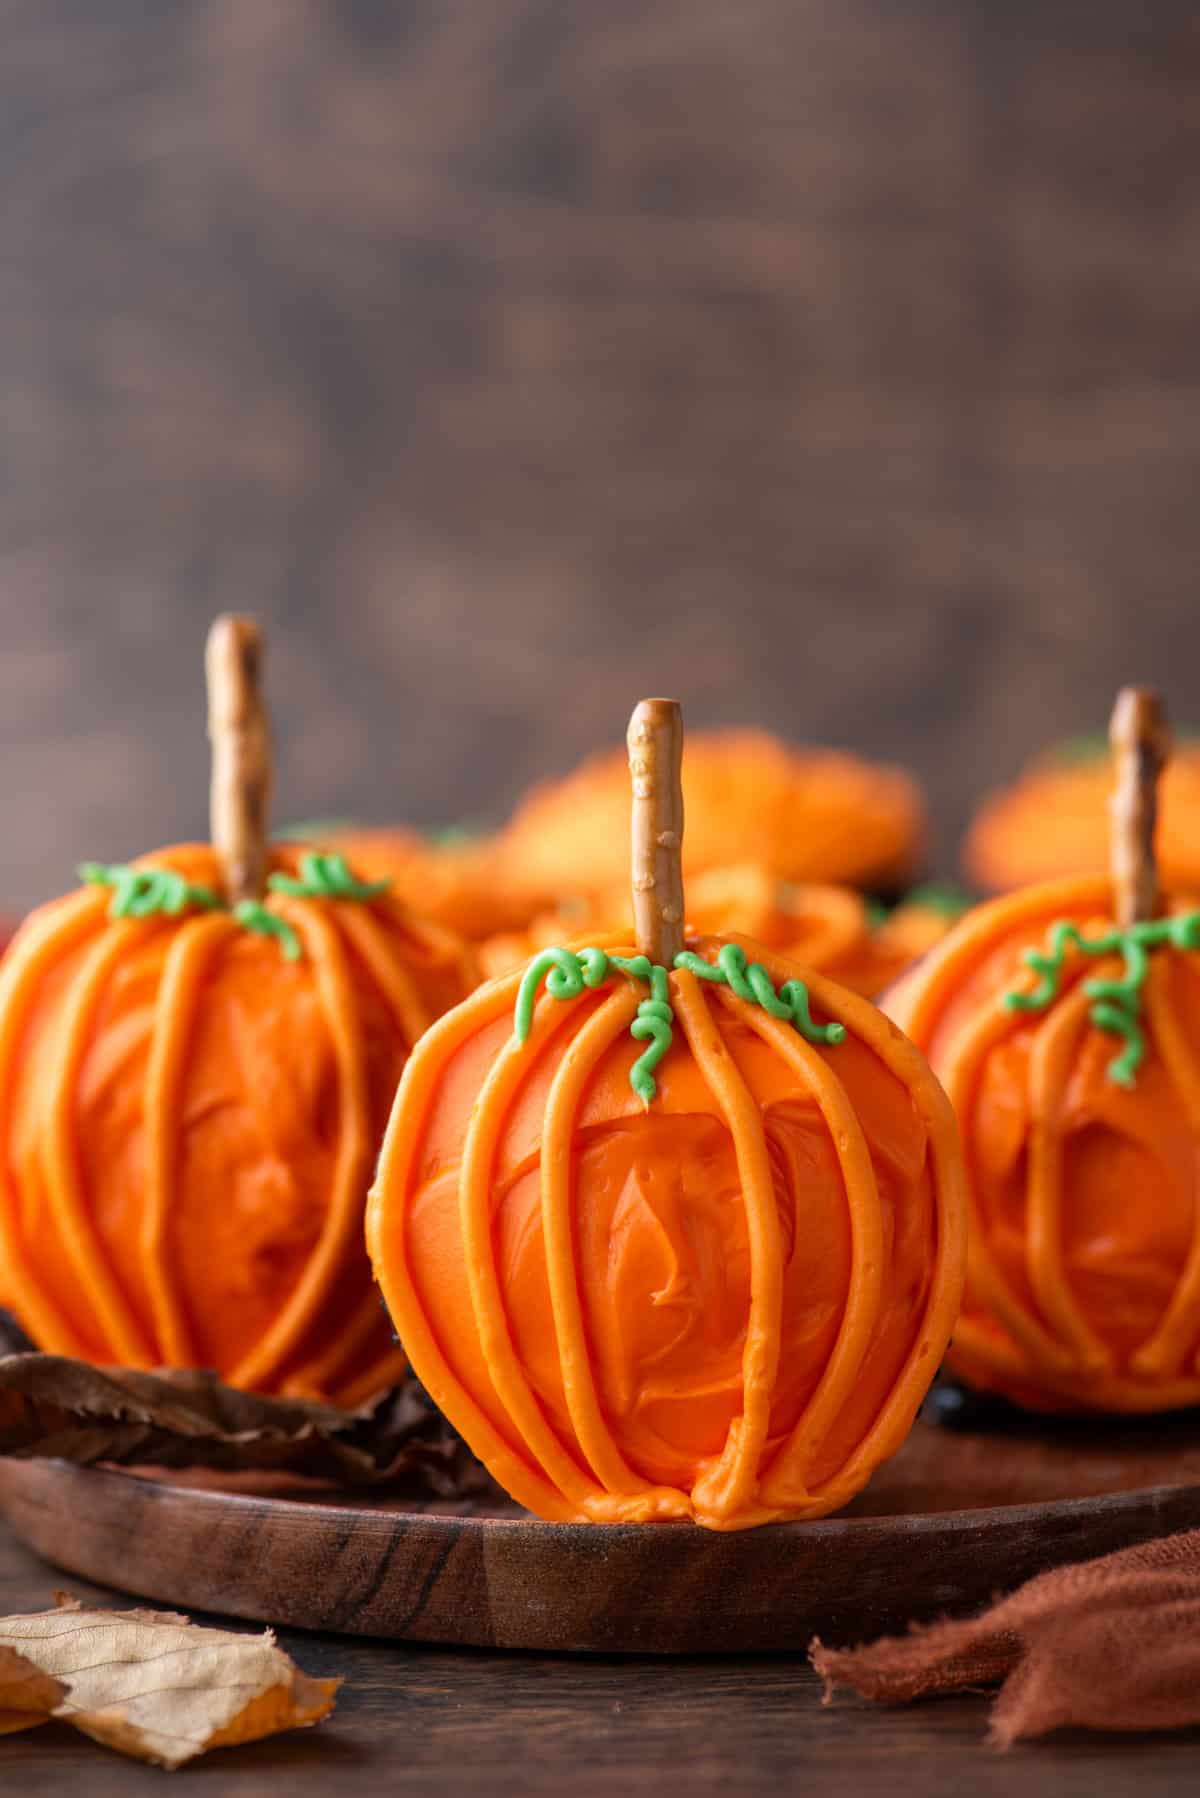 pumpkin patch cupcakes on a wood plate standing up on their sides so the pretzel stick stems are standing up straight